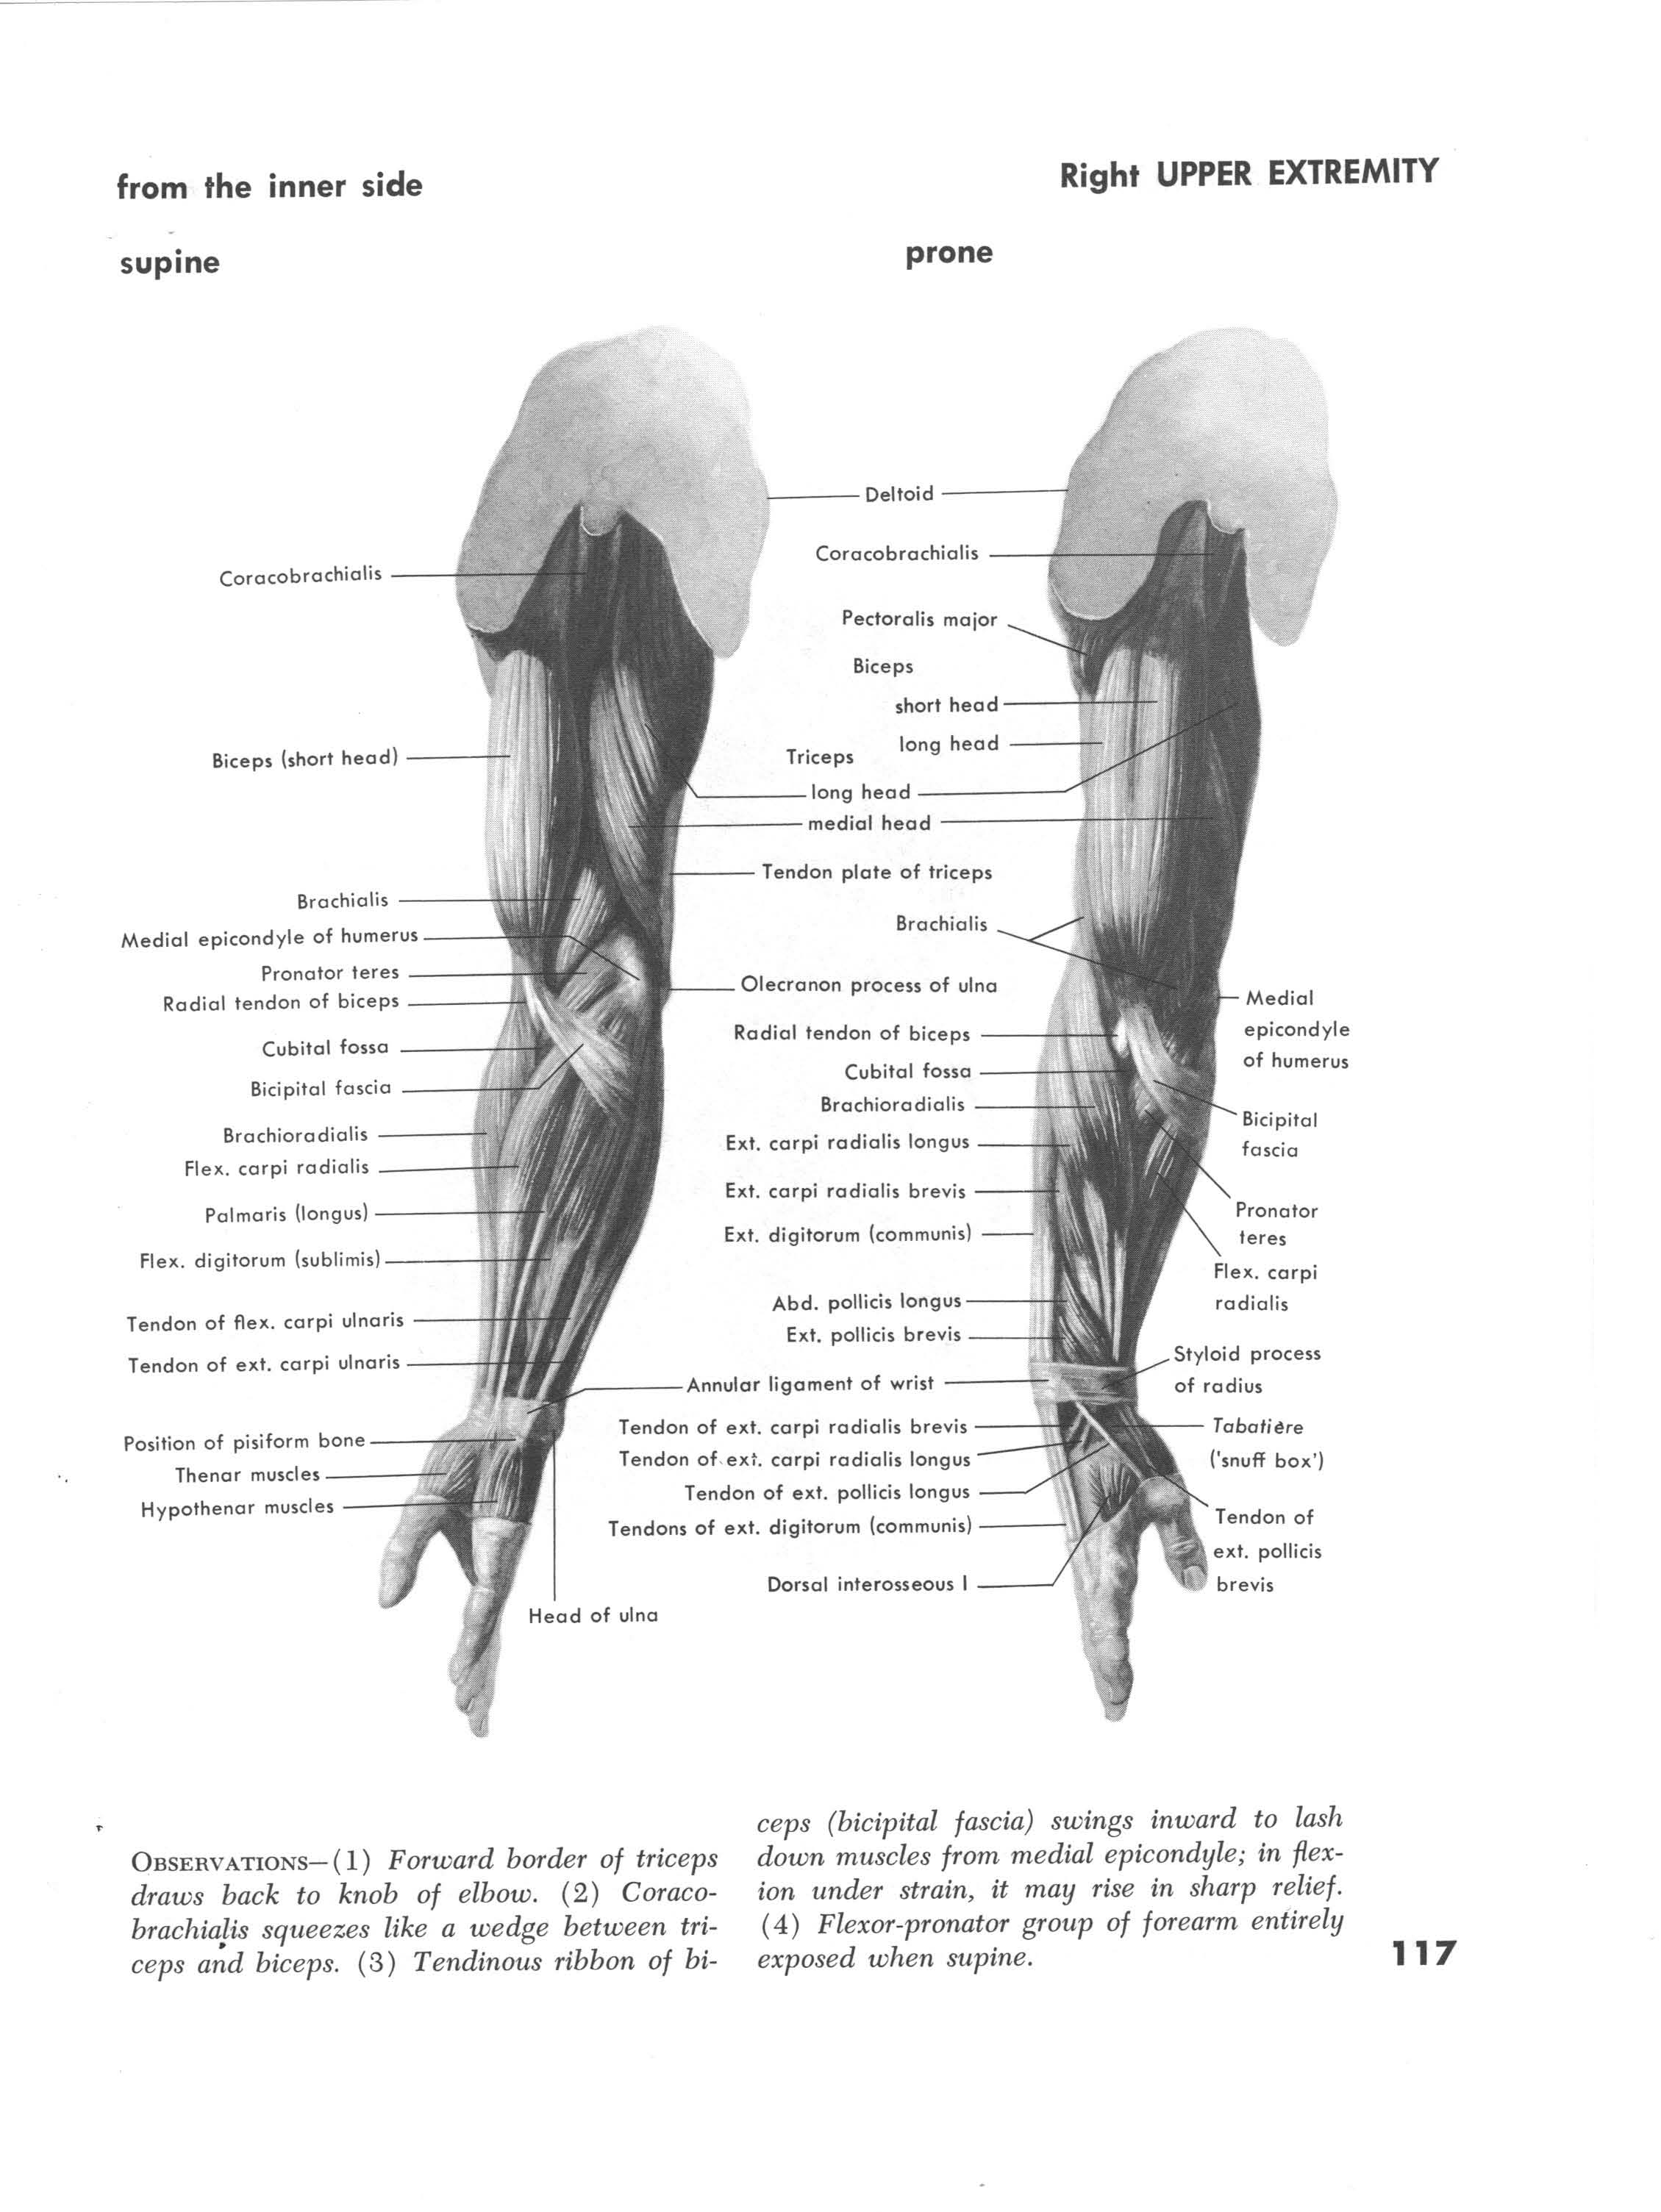 Muscles of the right upper extremity supine view